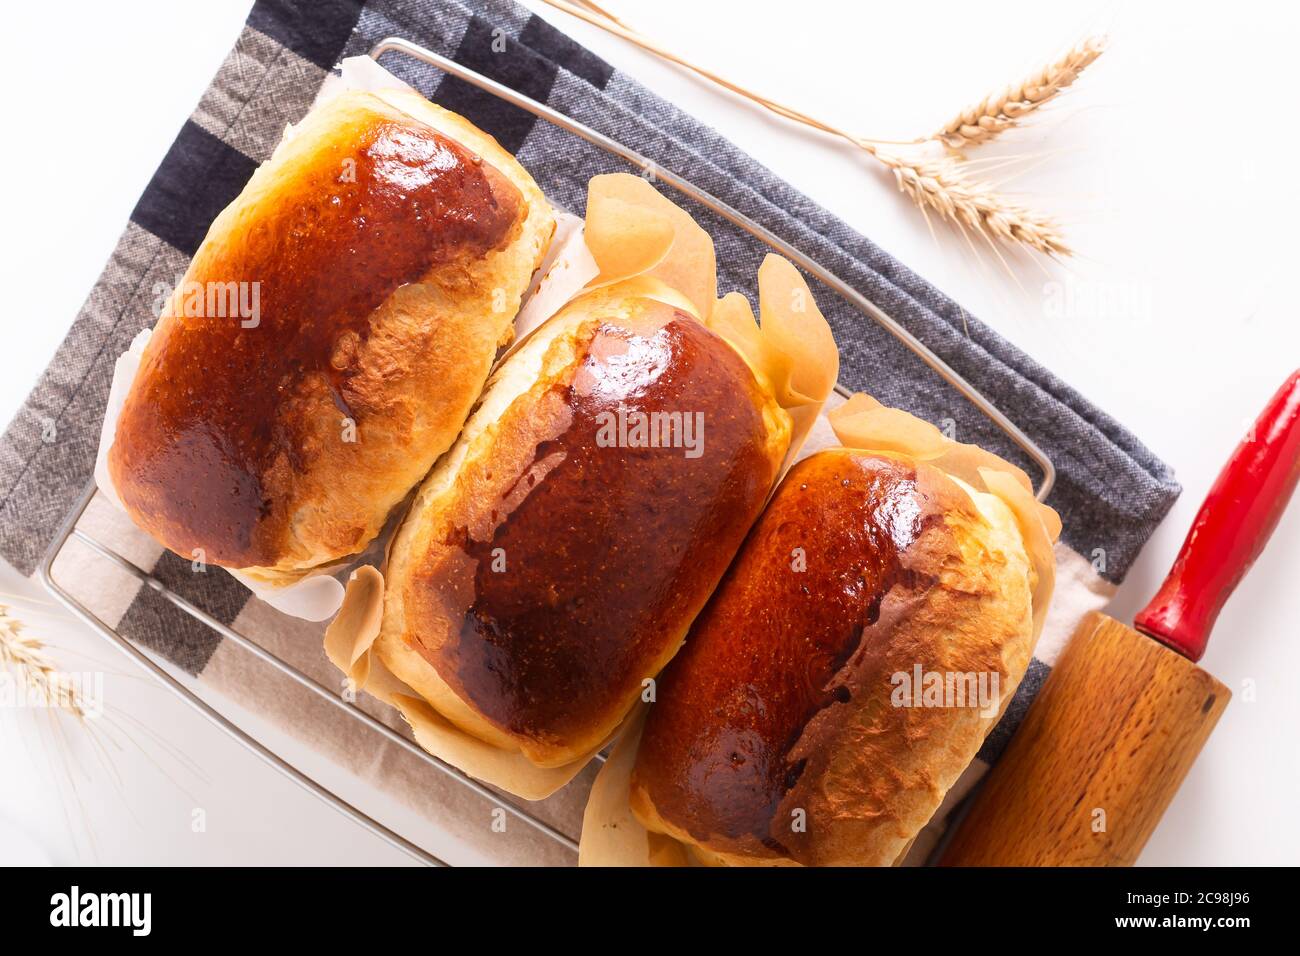 Food Baking concept Fresh baked organic homemade soft milk loaf bread with copy space Stock Photo